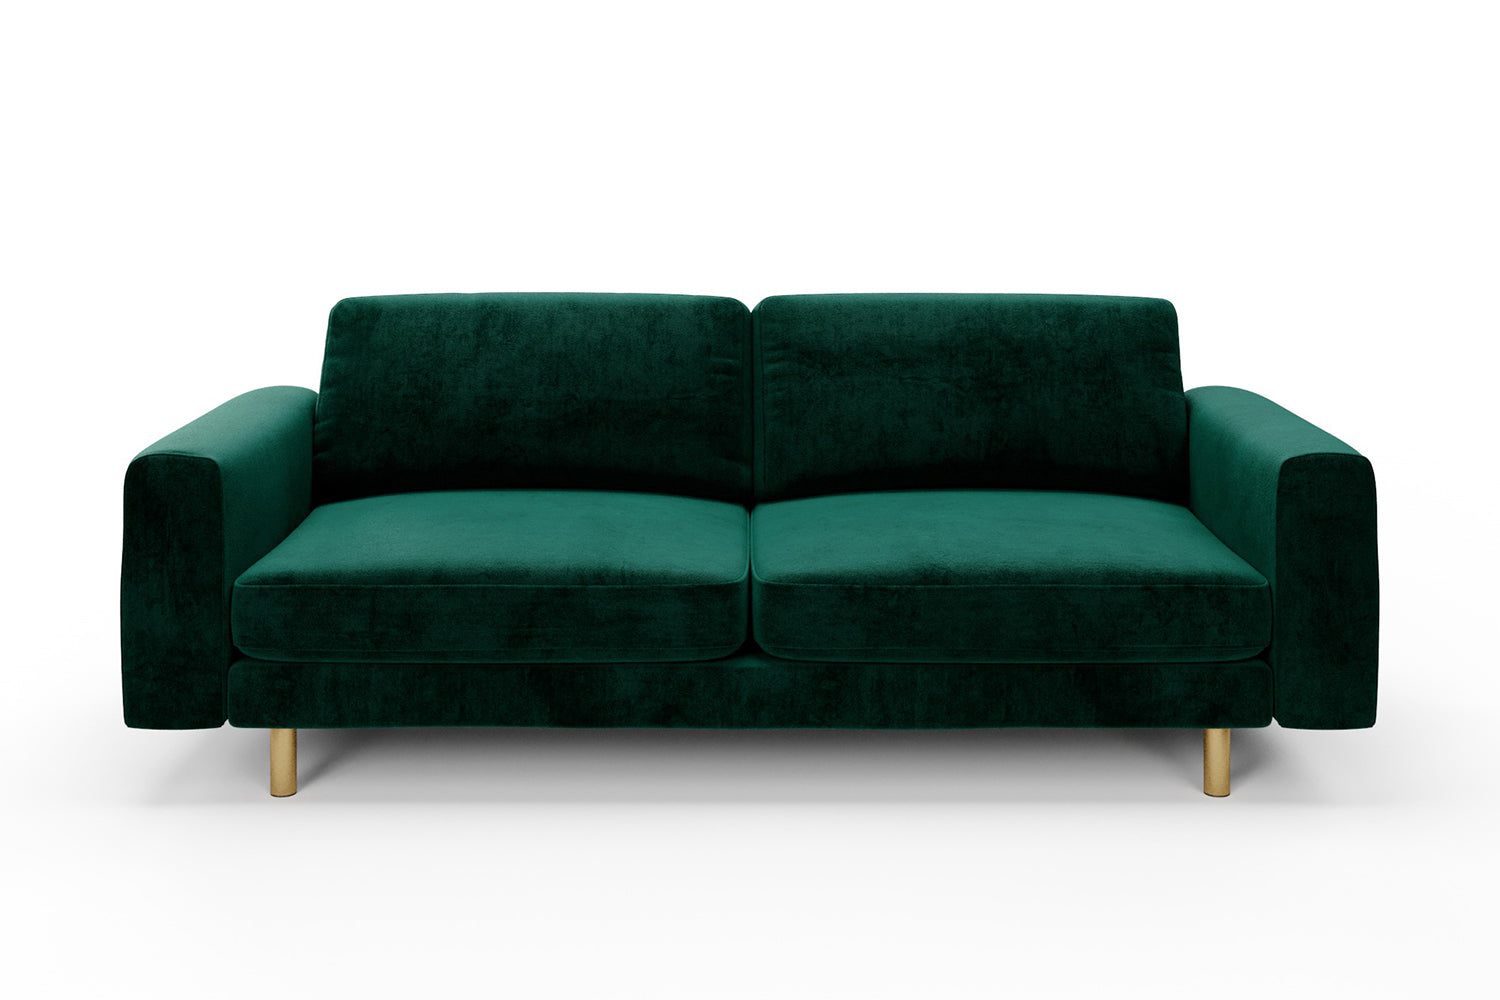 SNUG | The Big Chill 3 Seater Sofa in Forest Green variant_40414878433328